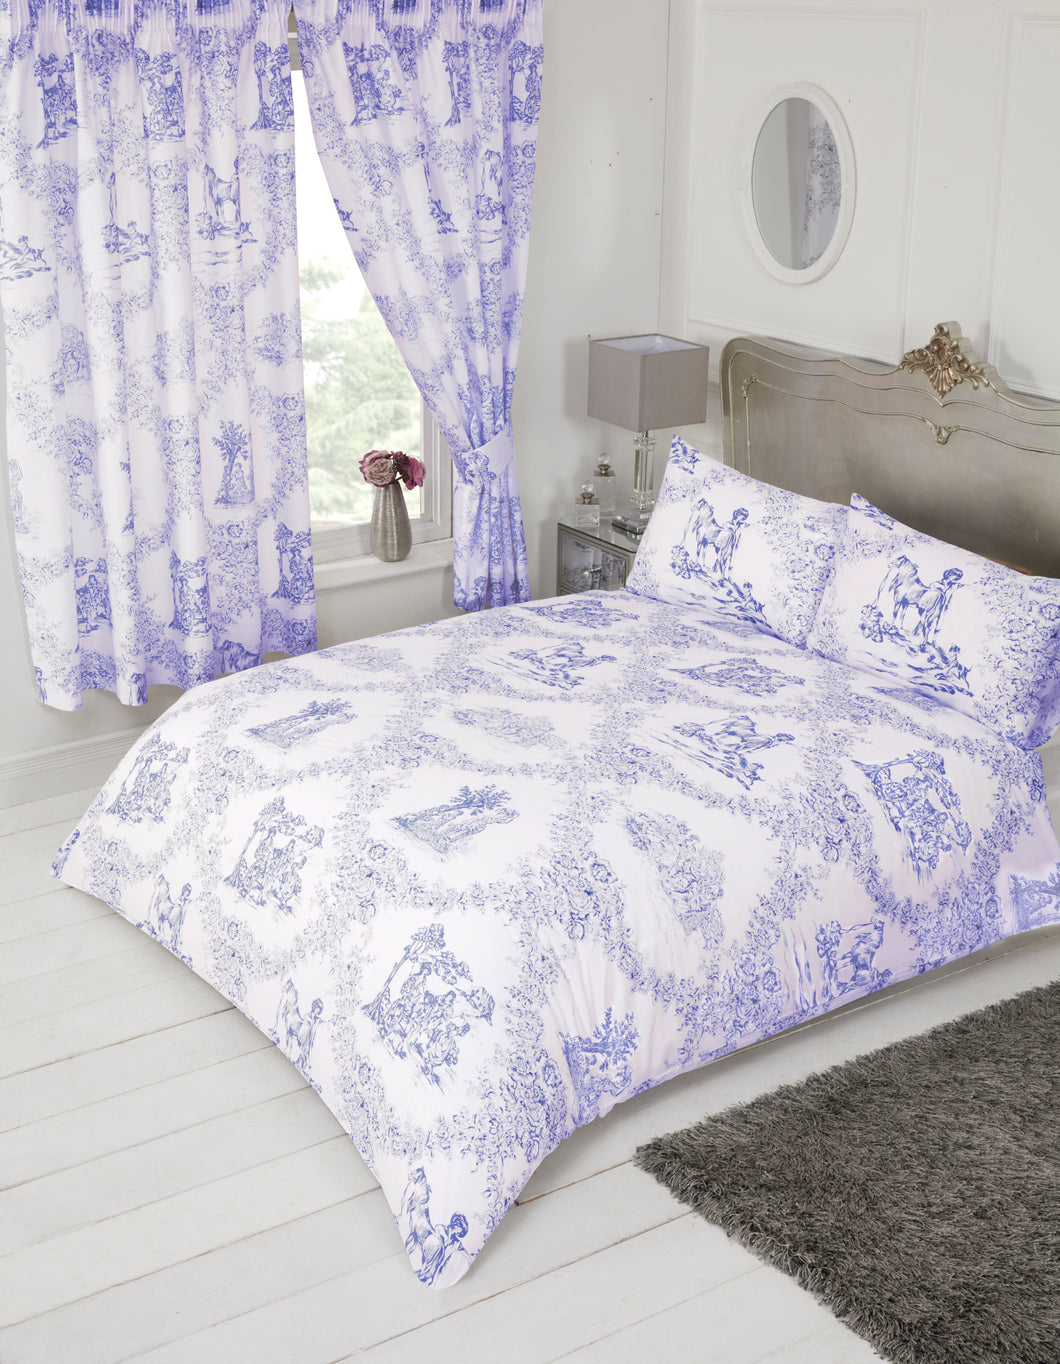 Toile De Jouy Blue - Duvet Cover Set French Countryside Floral